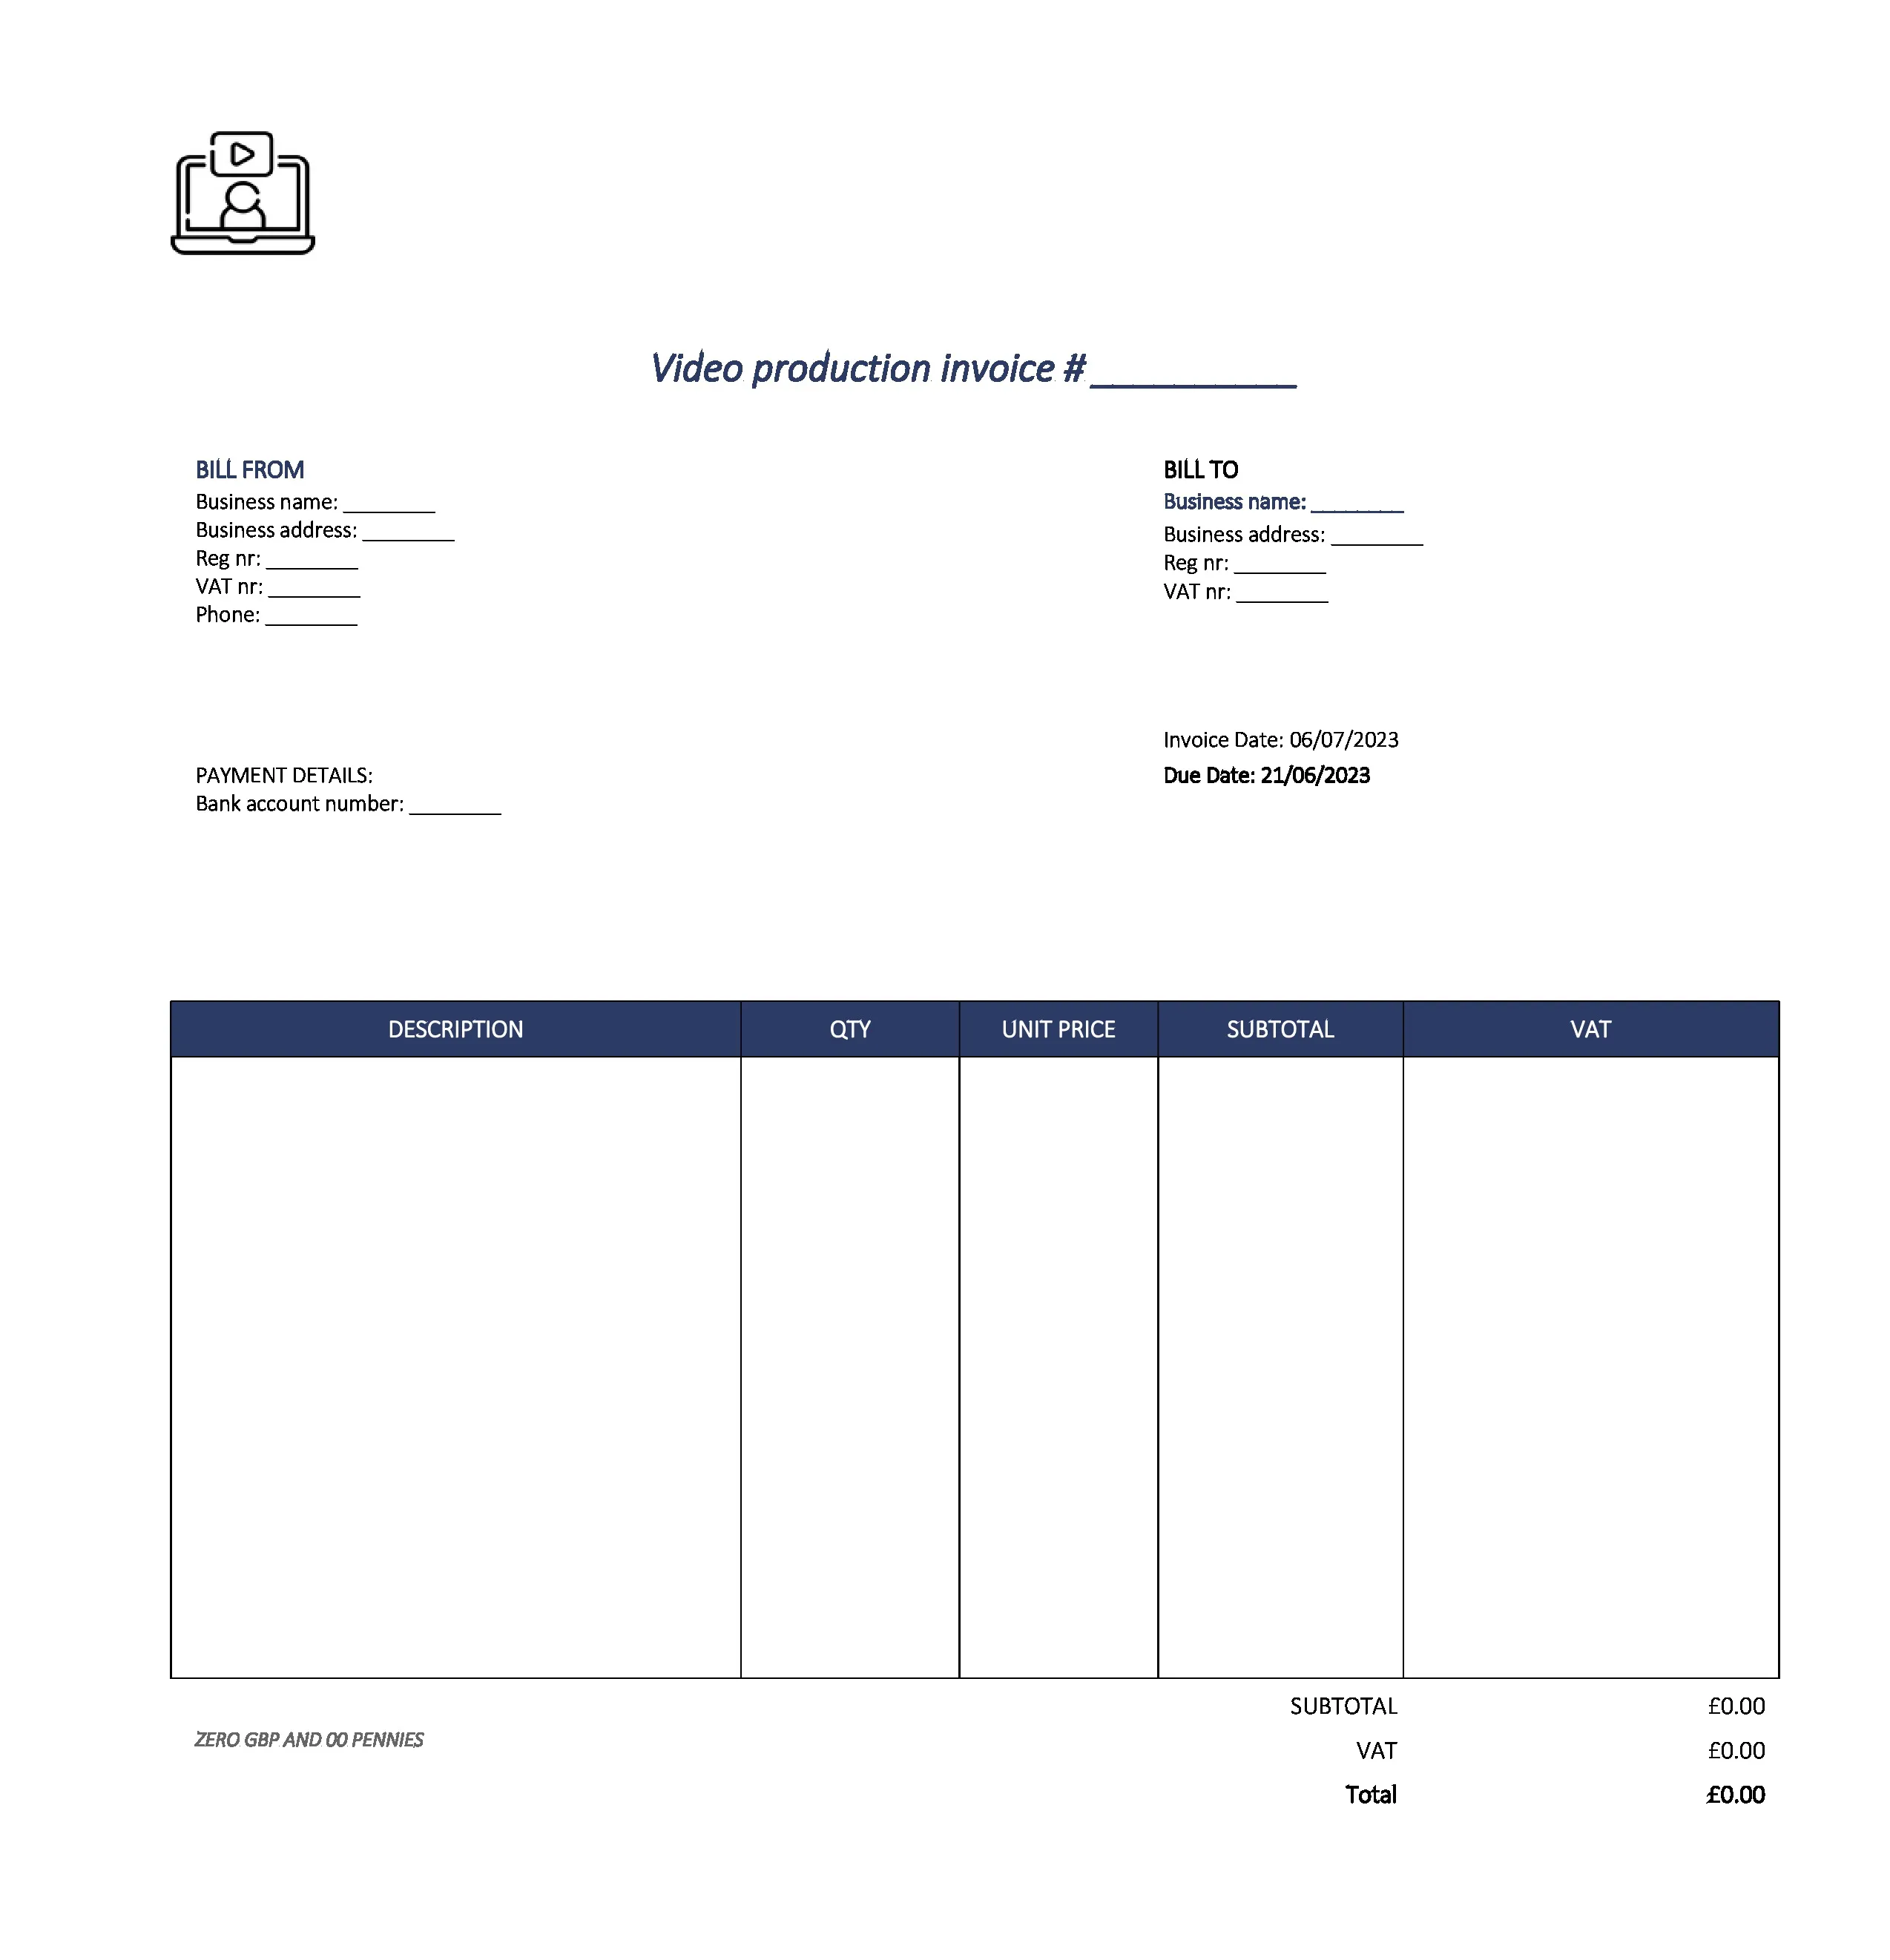 detailed video production invoice template UK Excel / Google sheets